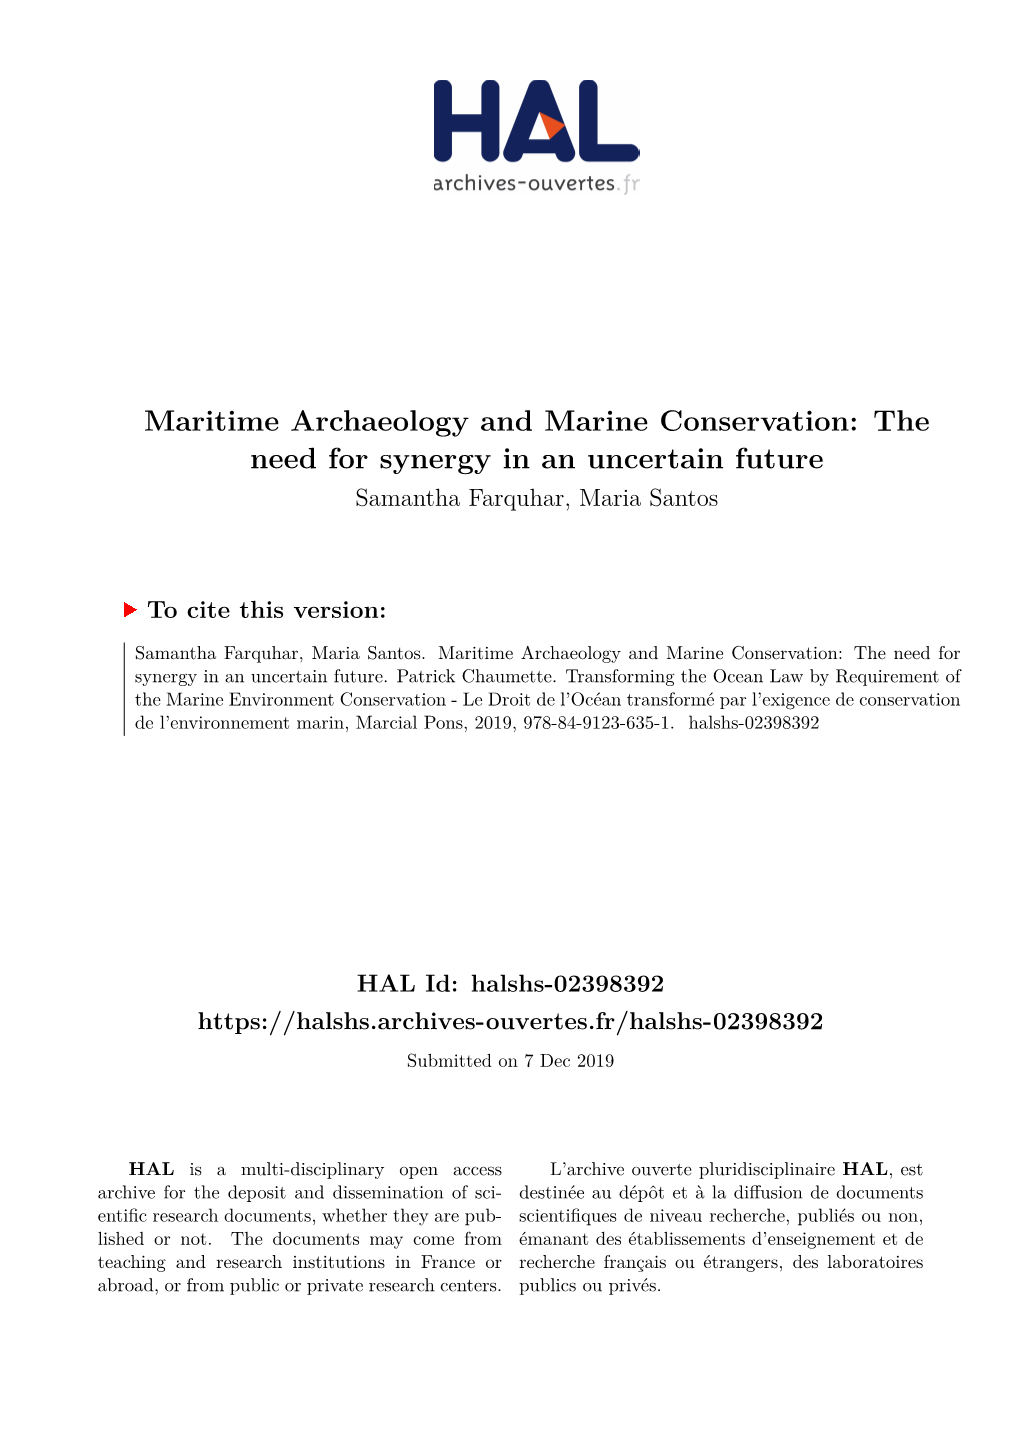 Maritime Archaeology and Marine Conservation: the Need for Synergy in an Uncertain Future Samantha Farquhar, Maria Santos